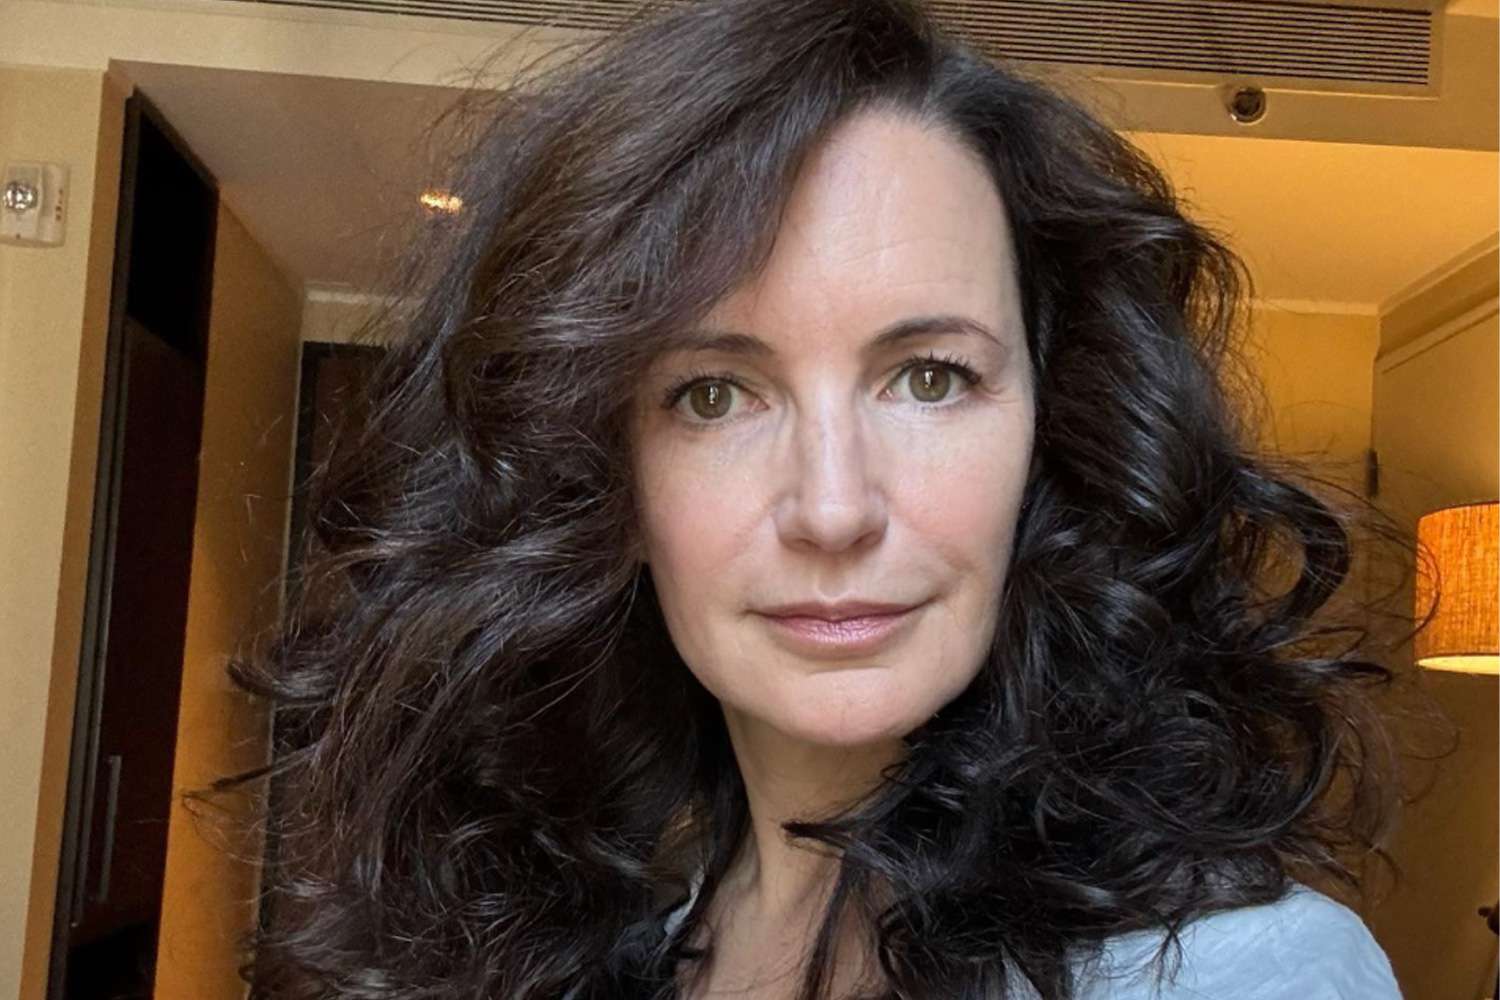 Kristin Davis Shows Off Natural Curls and Goes Makeup-Free After Revealing She Dissolved Facial Filler